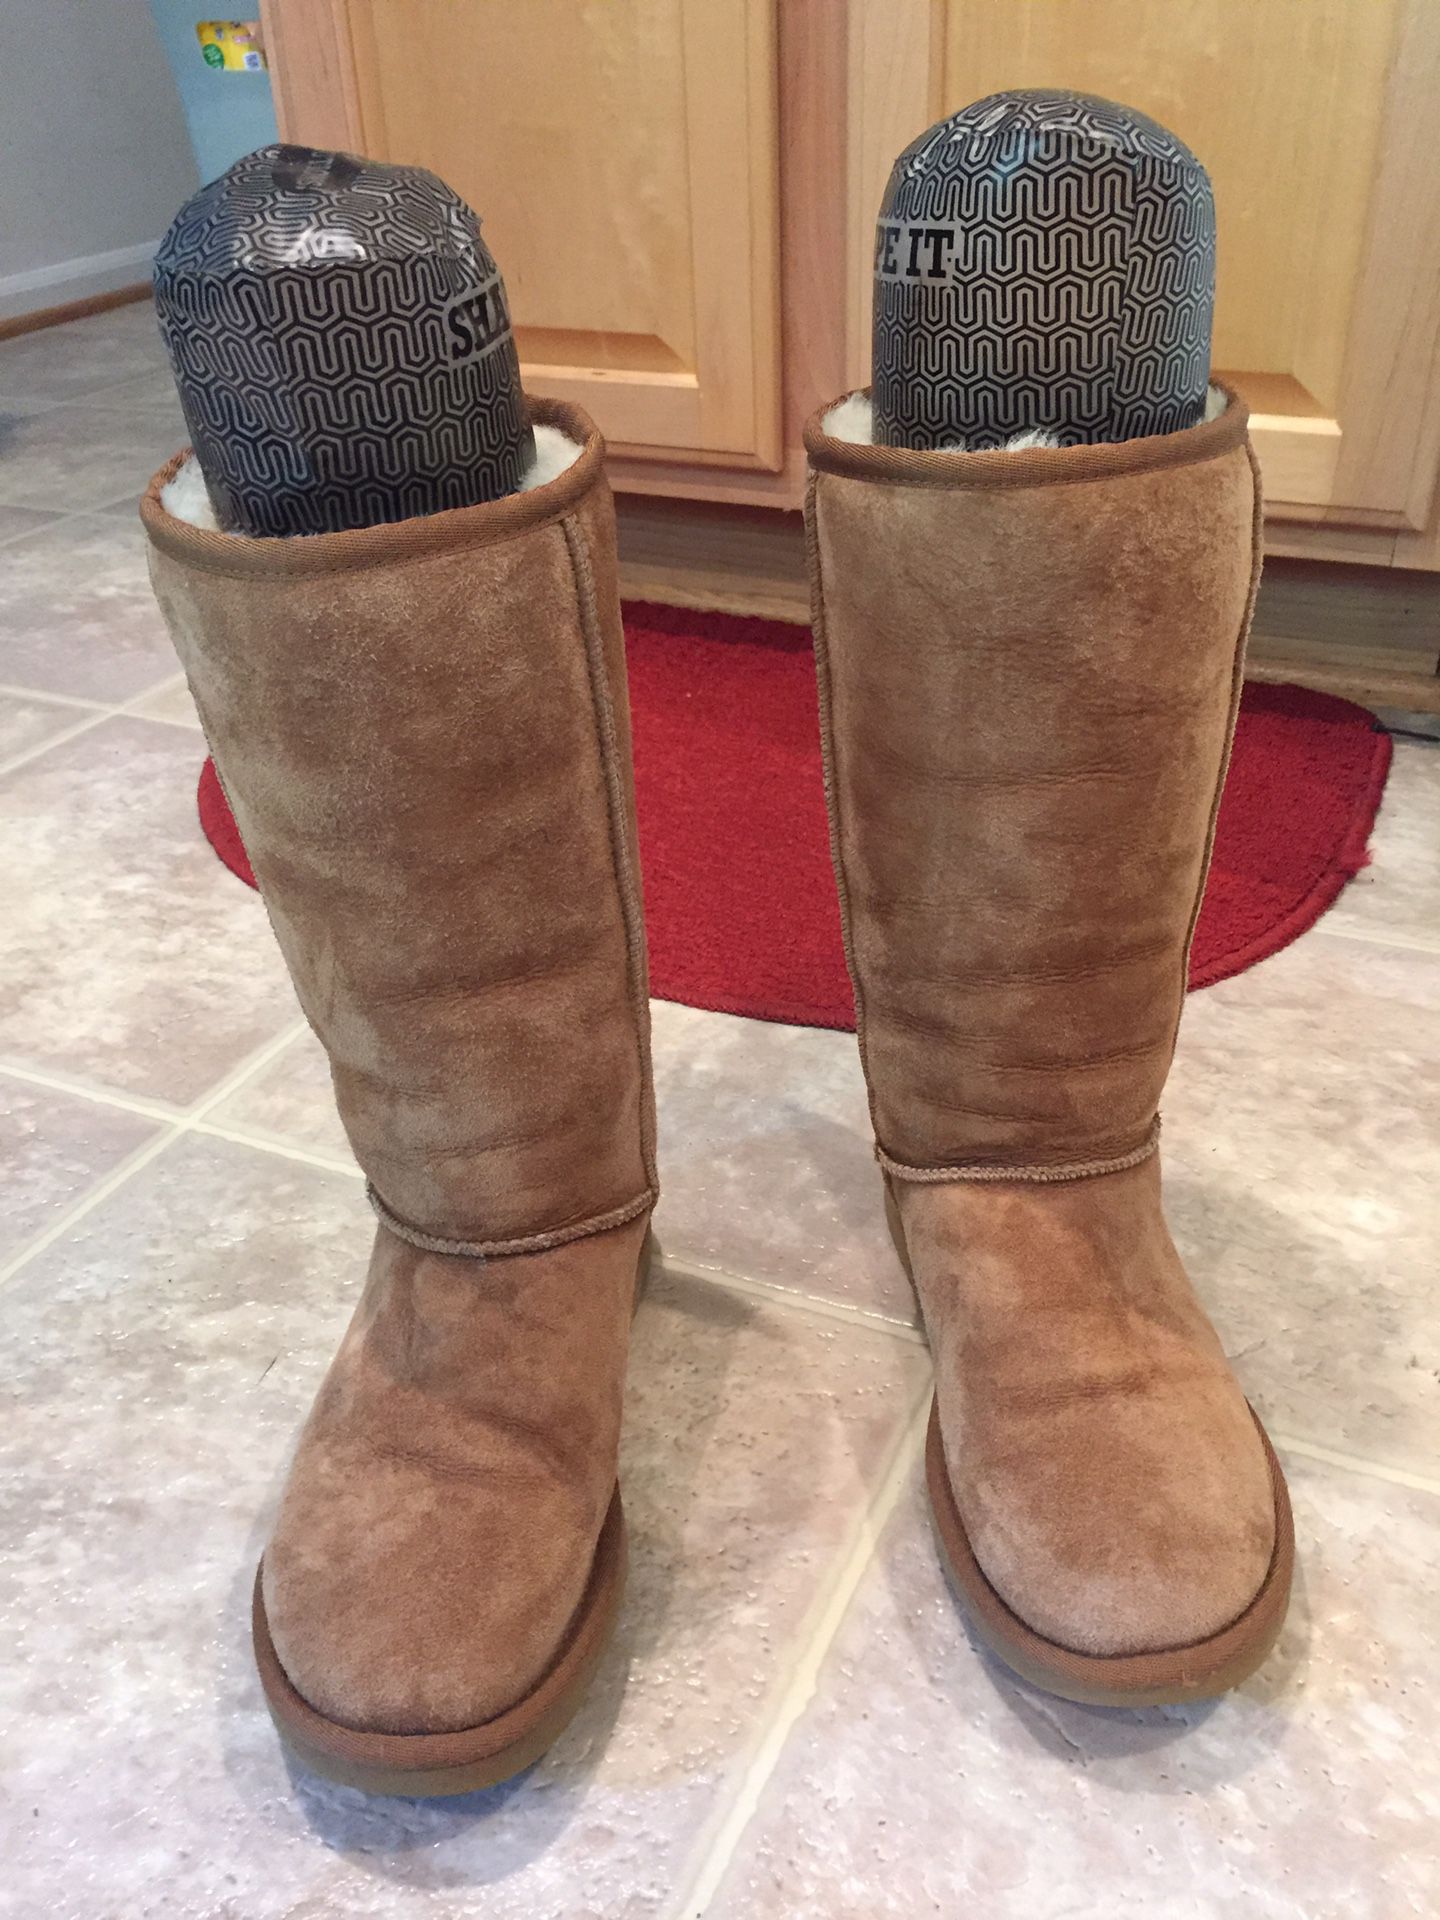 Classic Tall Ugg boots